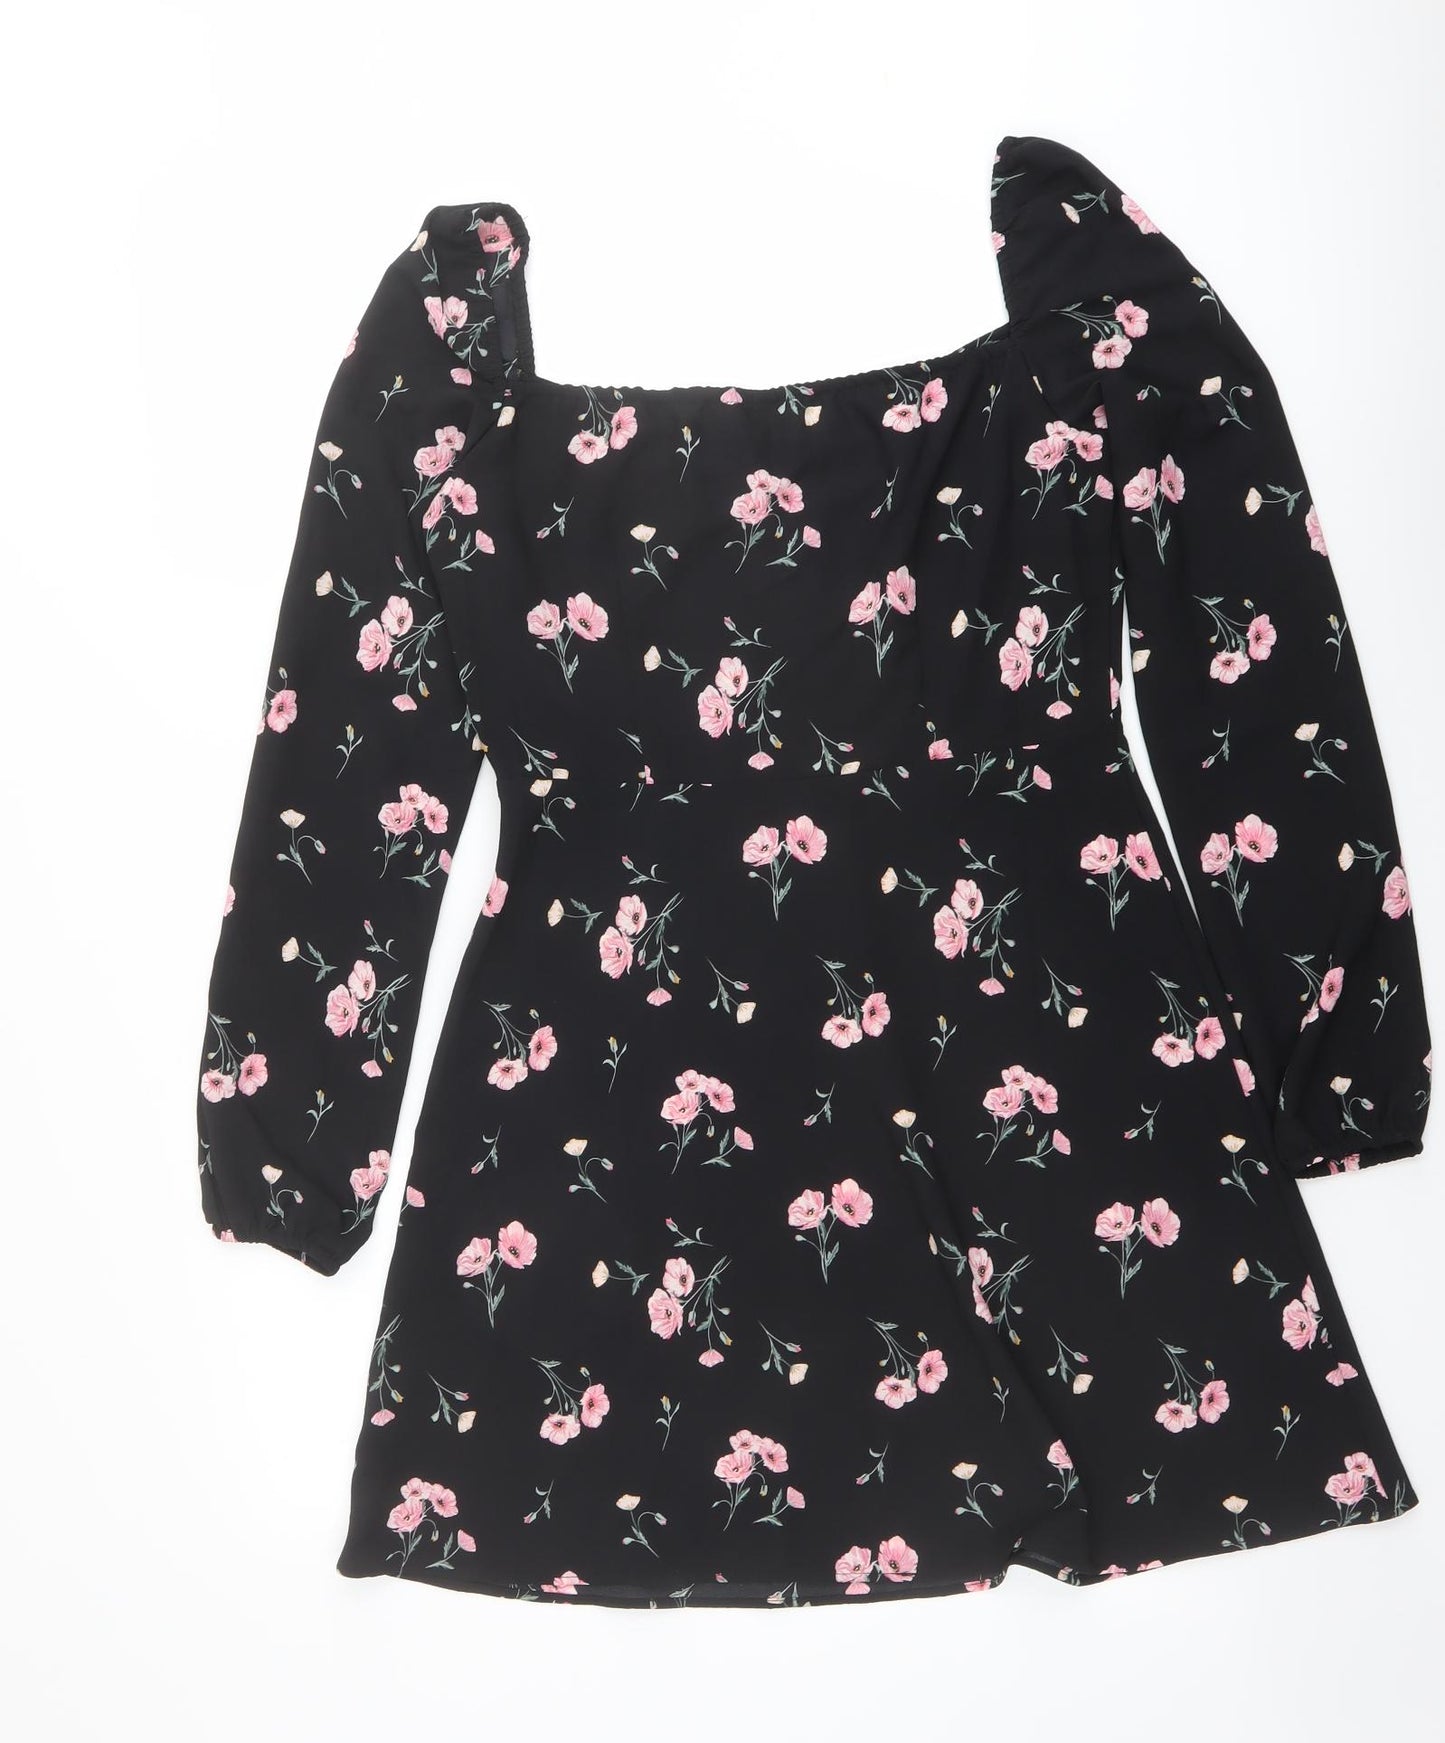 H&M Womens Black Floral Polyester A-Line Size 12 Round Neck Zip